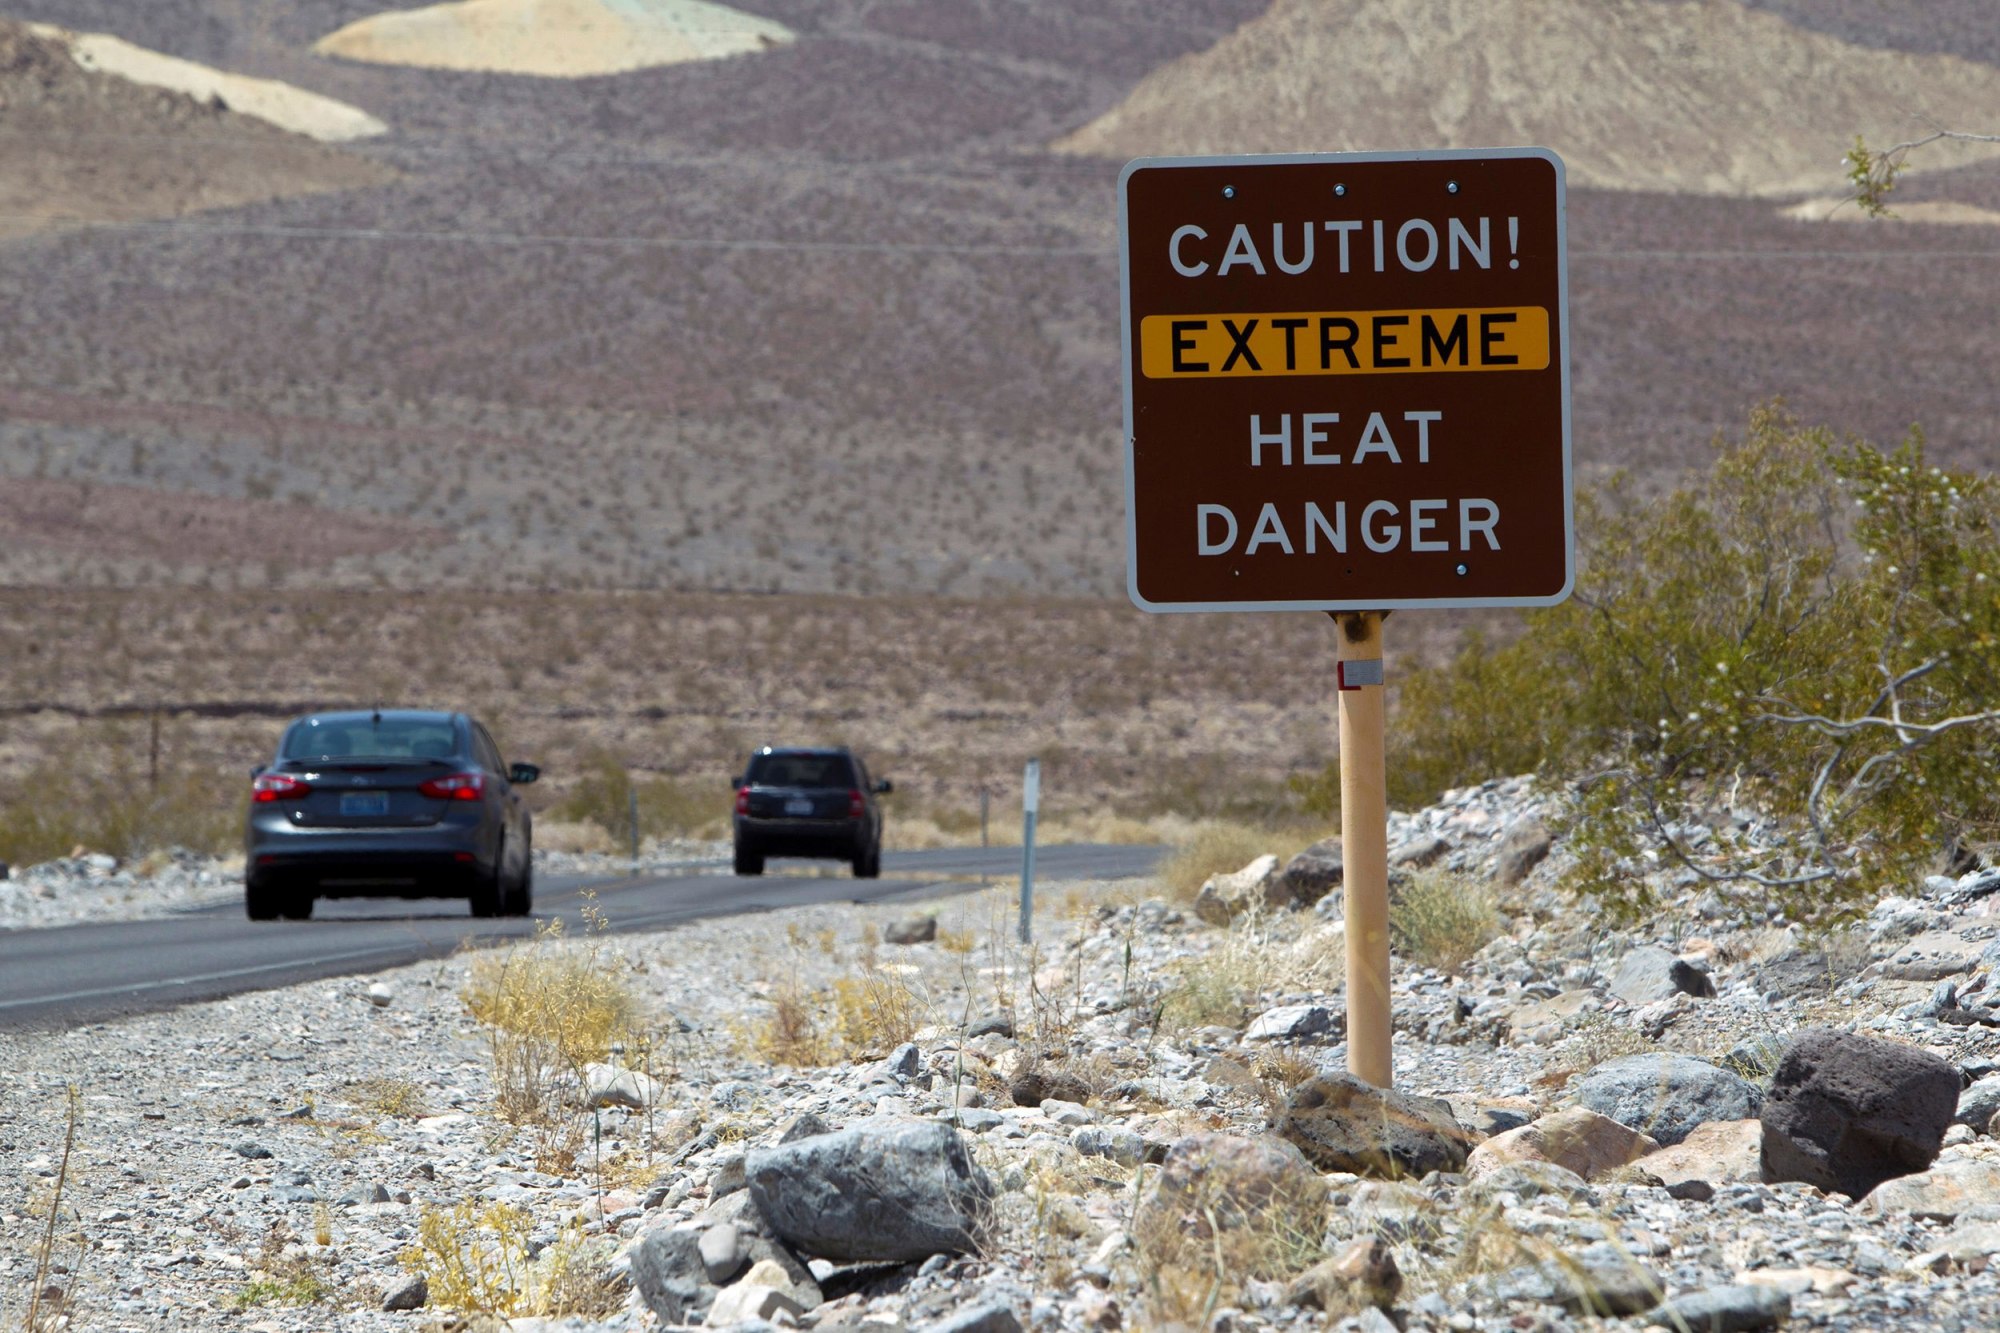 Death Valley Reaches 130 Degrees as Heat Wave Scorches the West